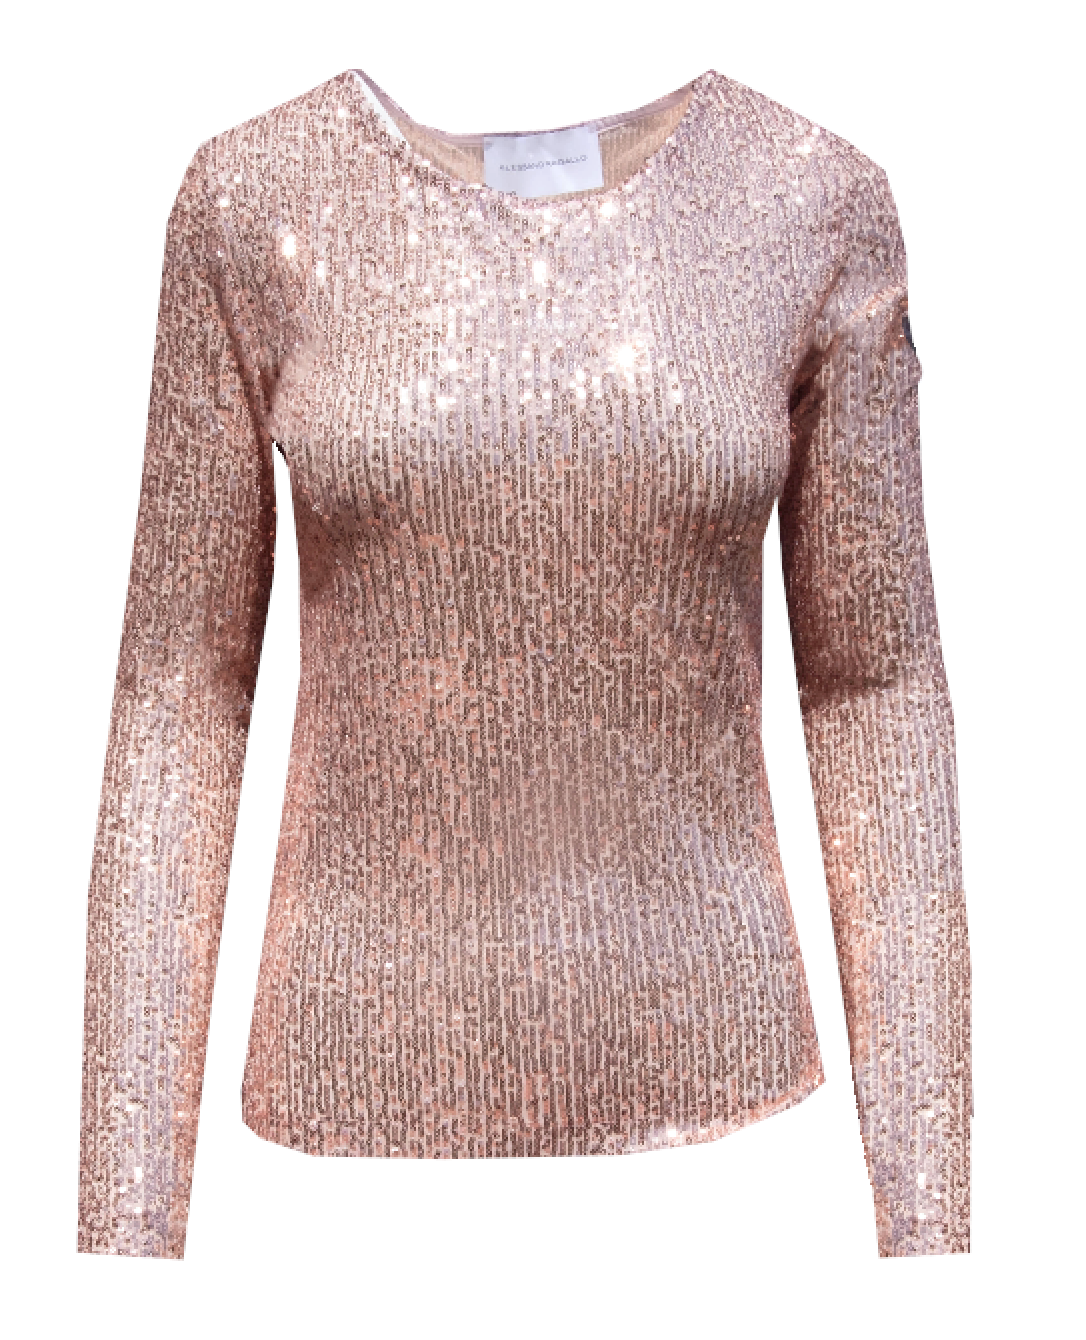 VIOLET - blouse with long sleeves in pink sequins